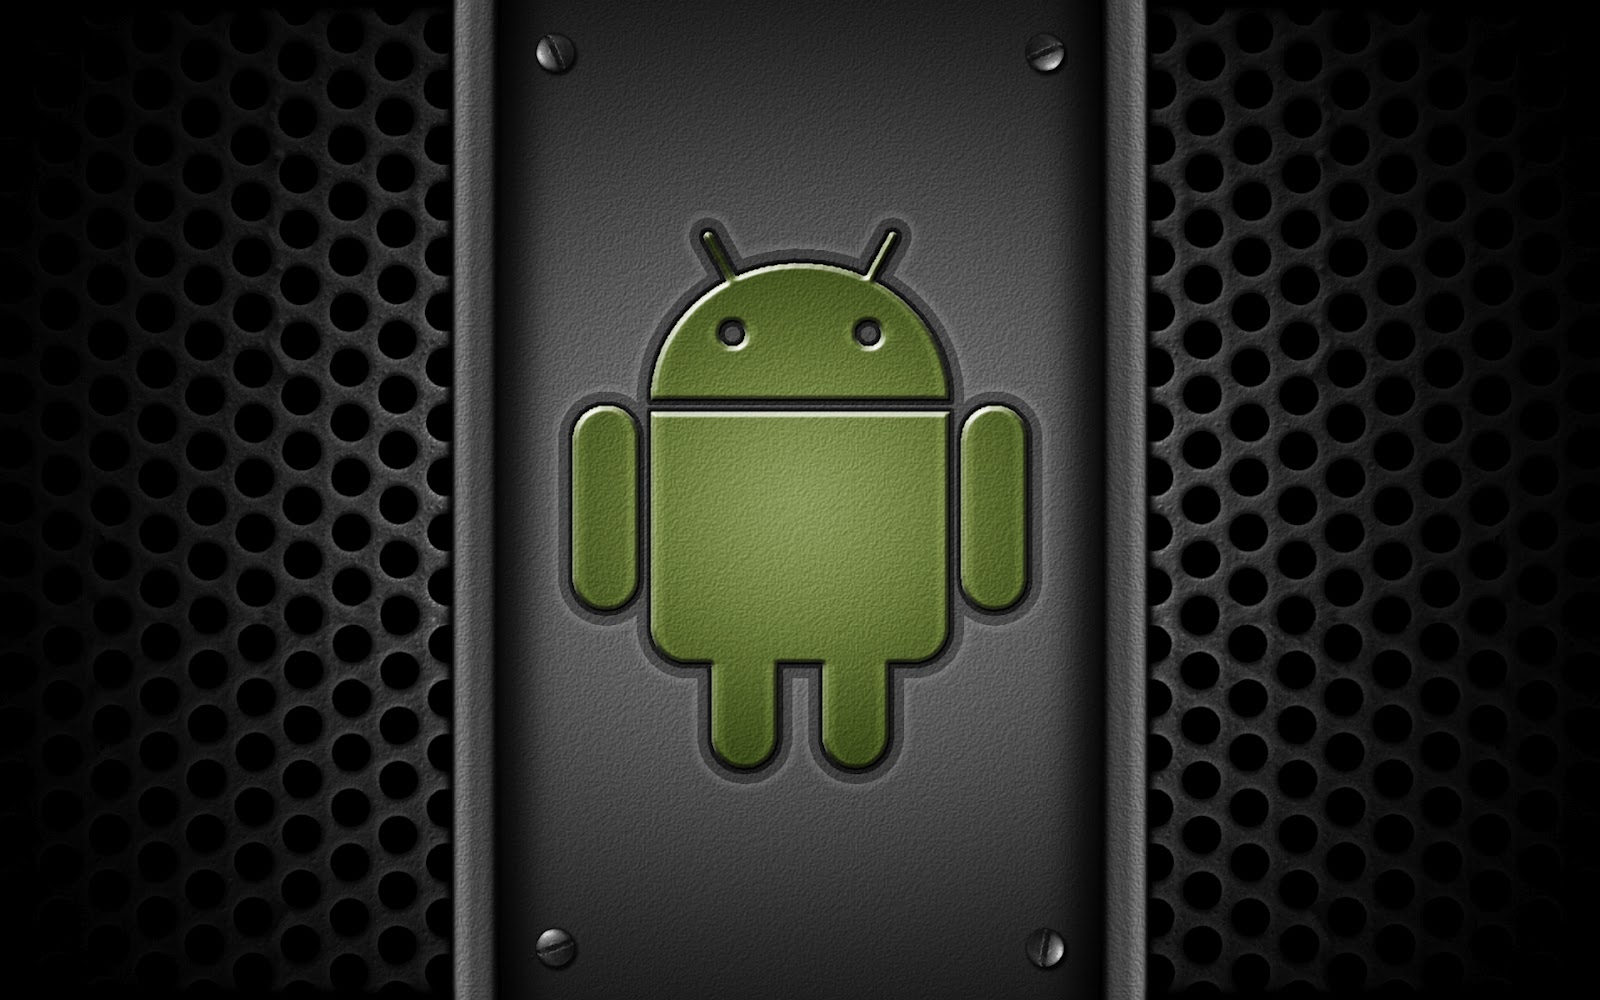 Android Wallpaper Hd For Pc